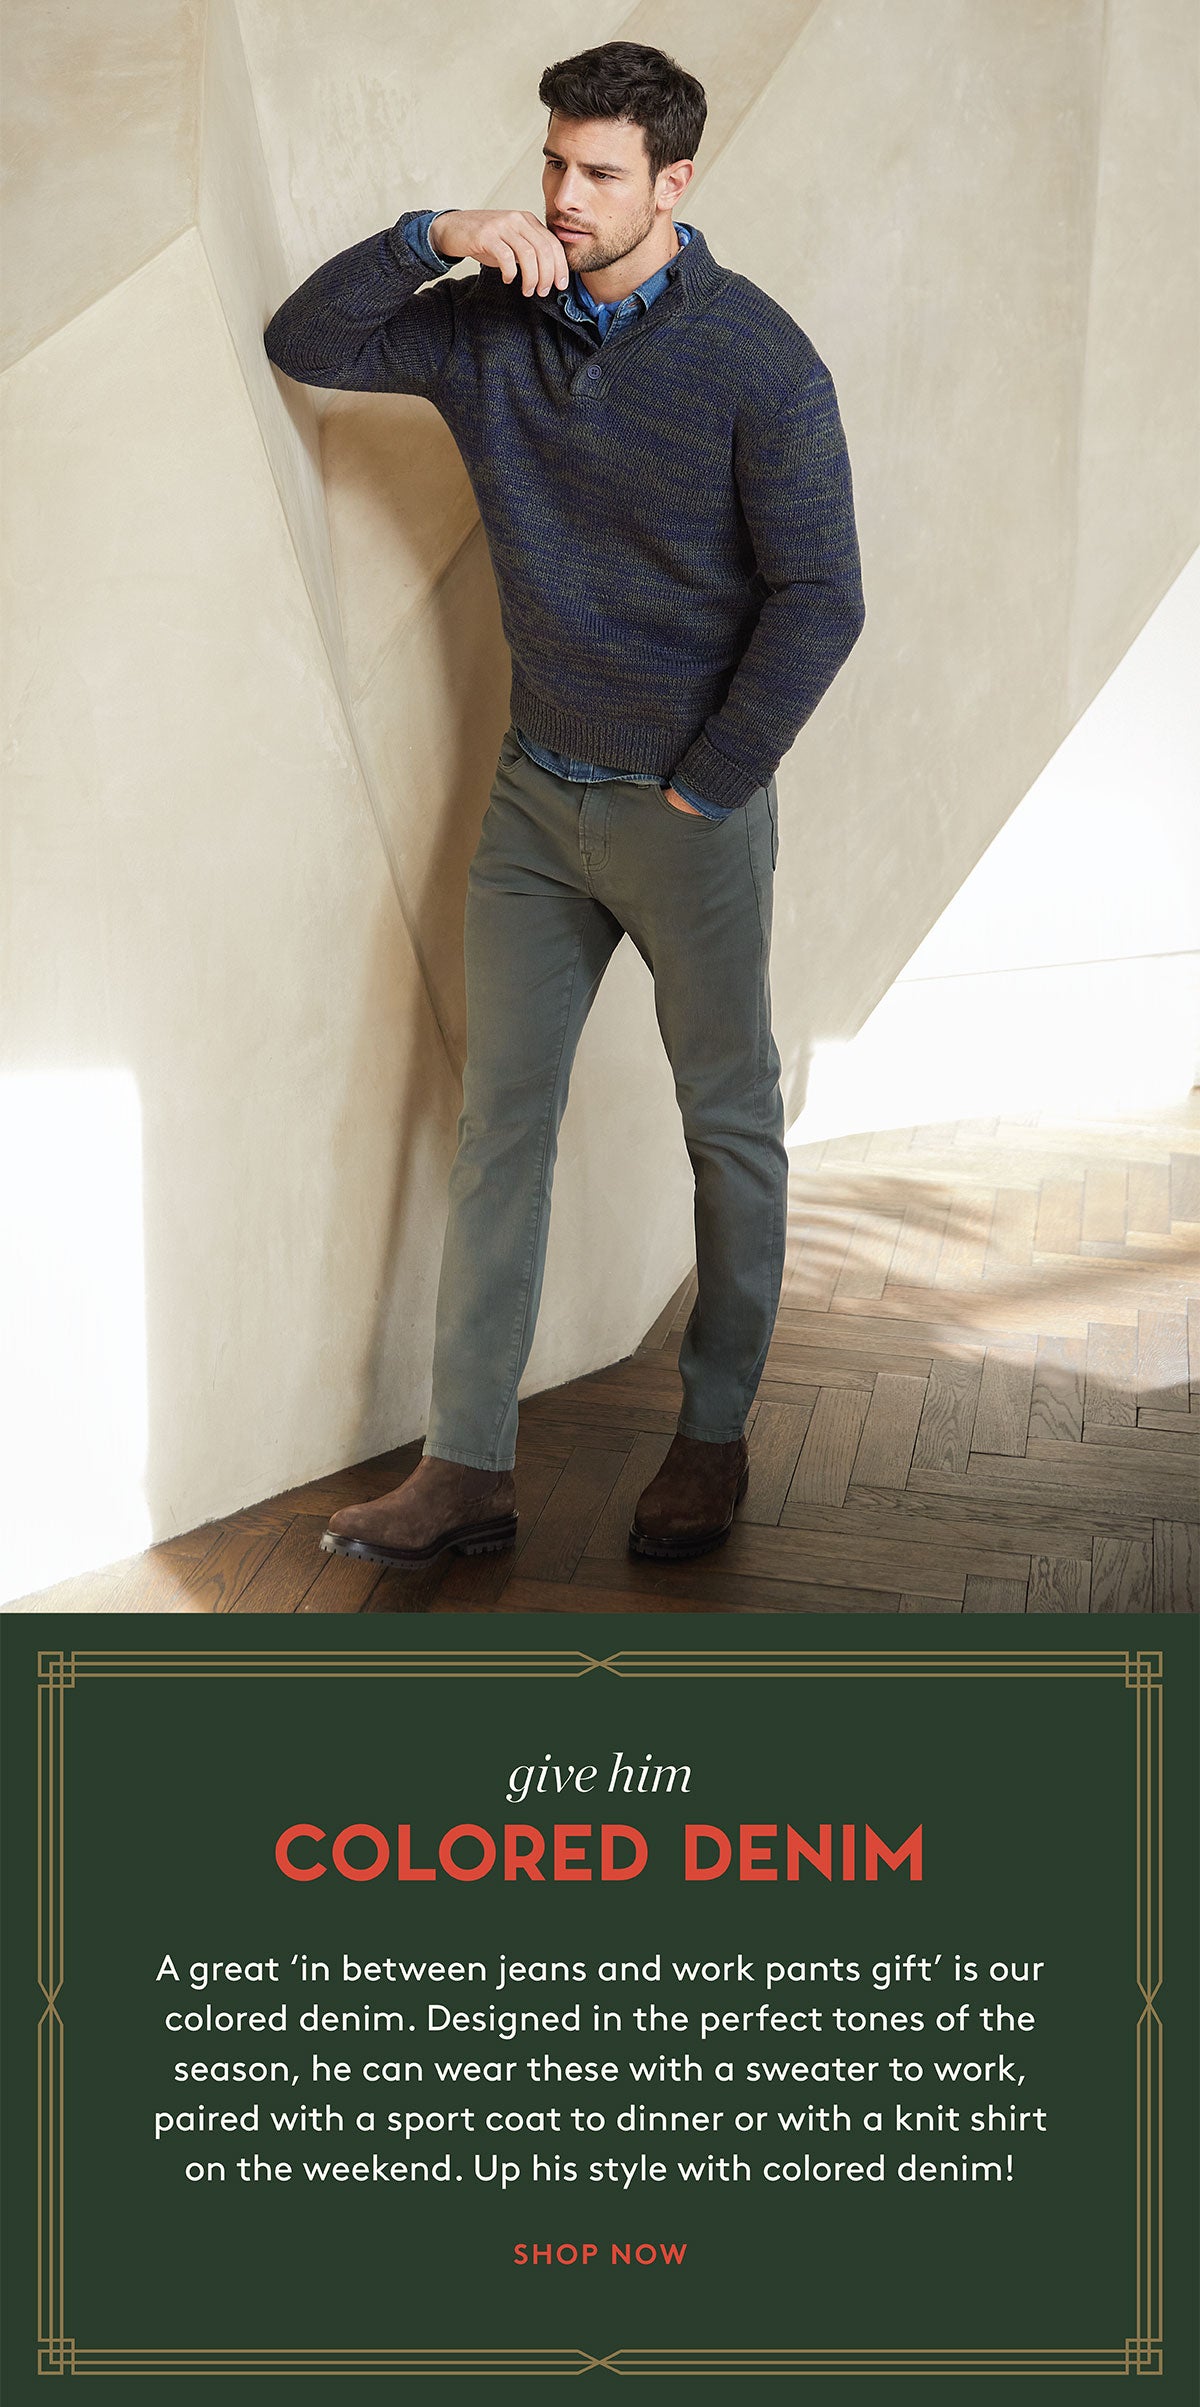 give him COLORED DENIM A great 'in between jeans and work pants gift' is our colored denim. Designed in the perfect tones of the season, he can wear these with a sweater to work, paired with a sport coat to dinner or with a knit shirt on the weekend. Up his style with colored denim! SHOP NOW